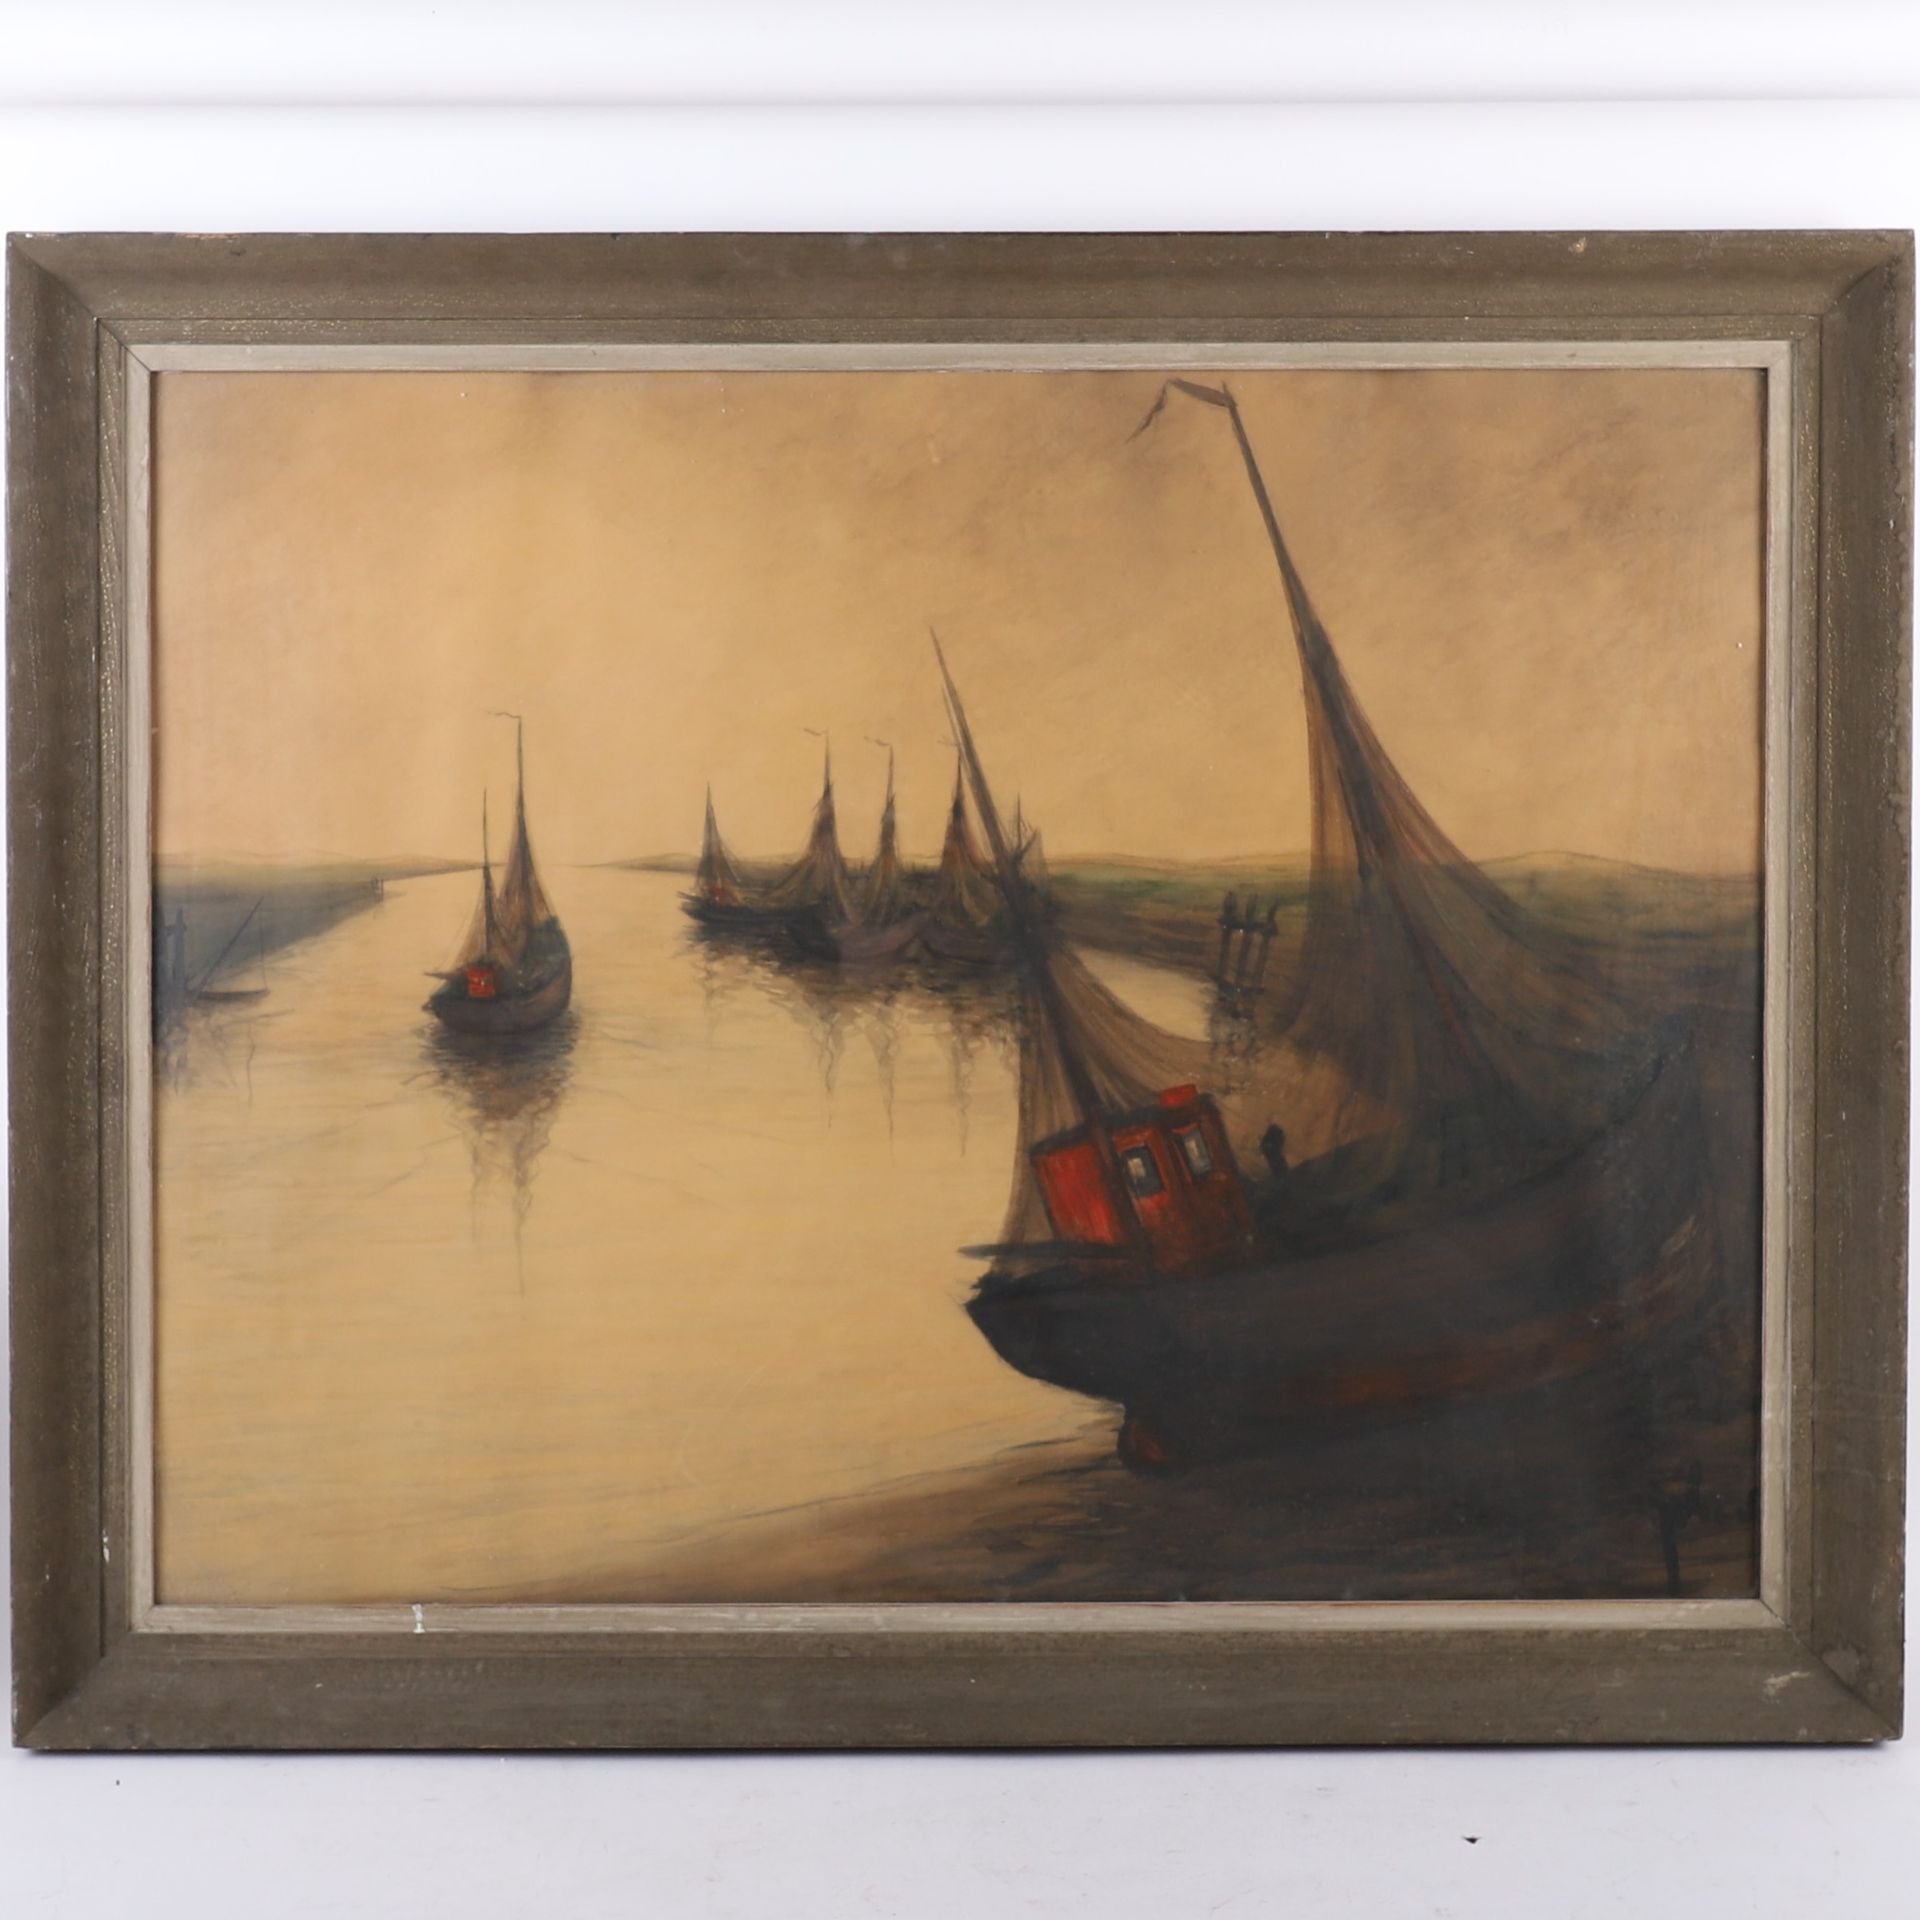 Null FISHING RETURN", late 19th century
Watercolor on paper, framed under glass
&hellip;